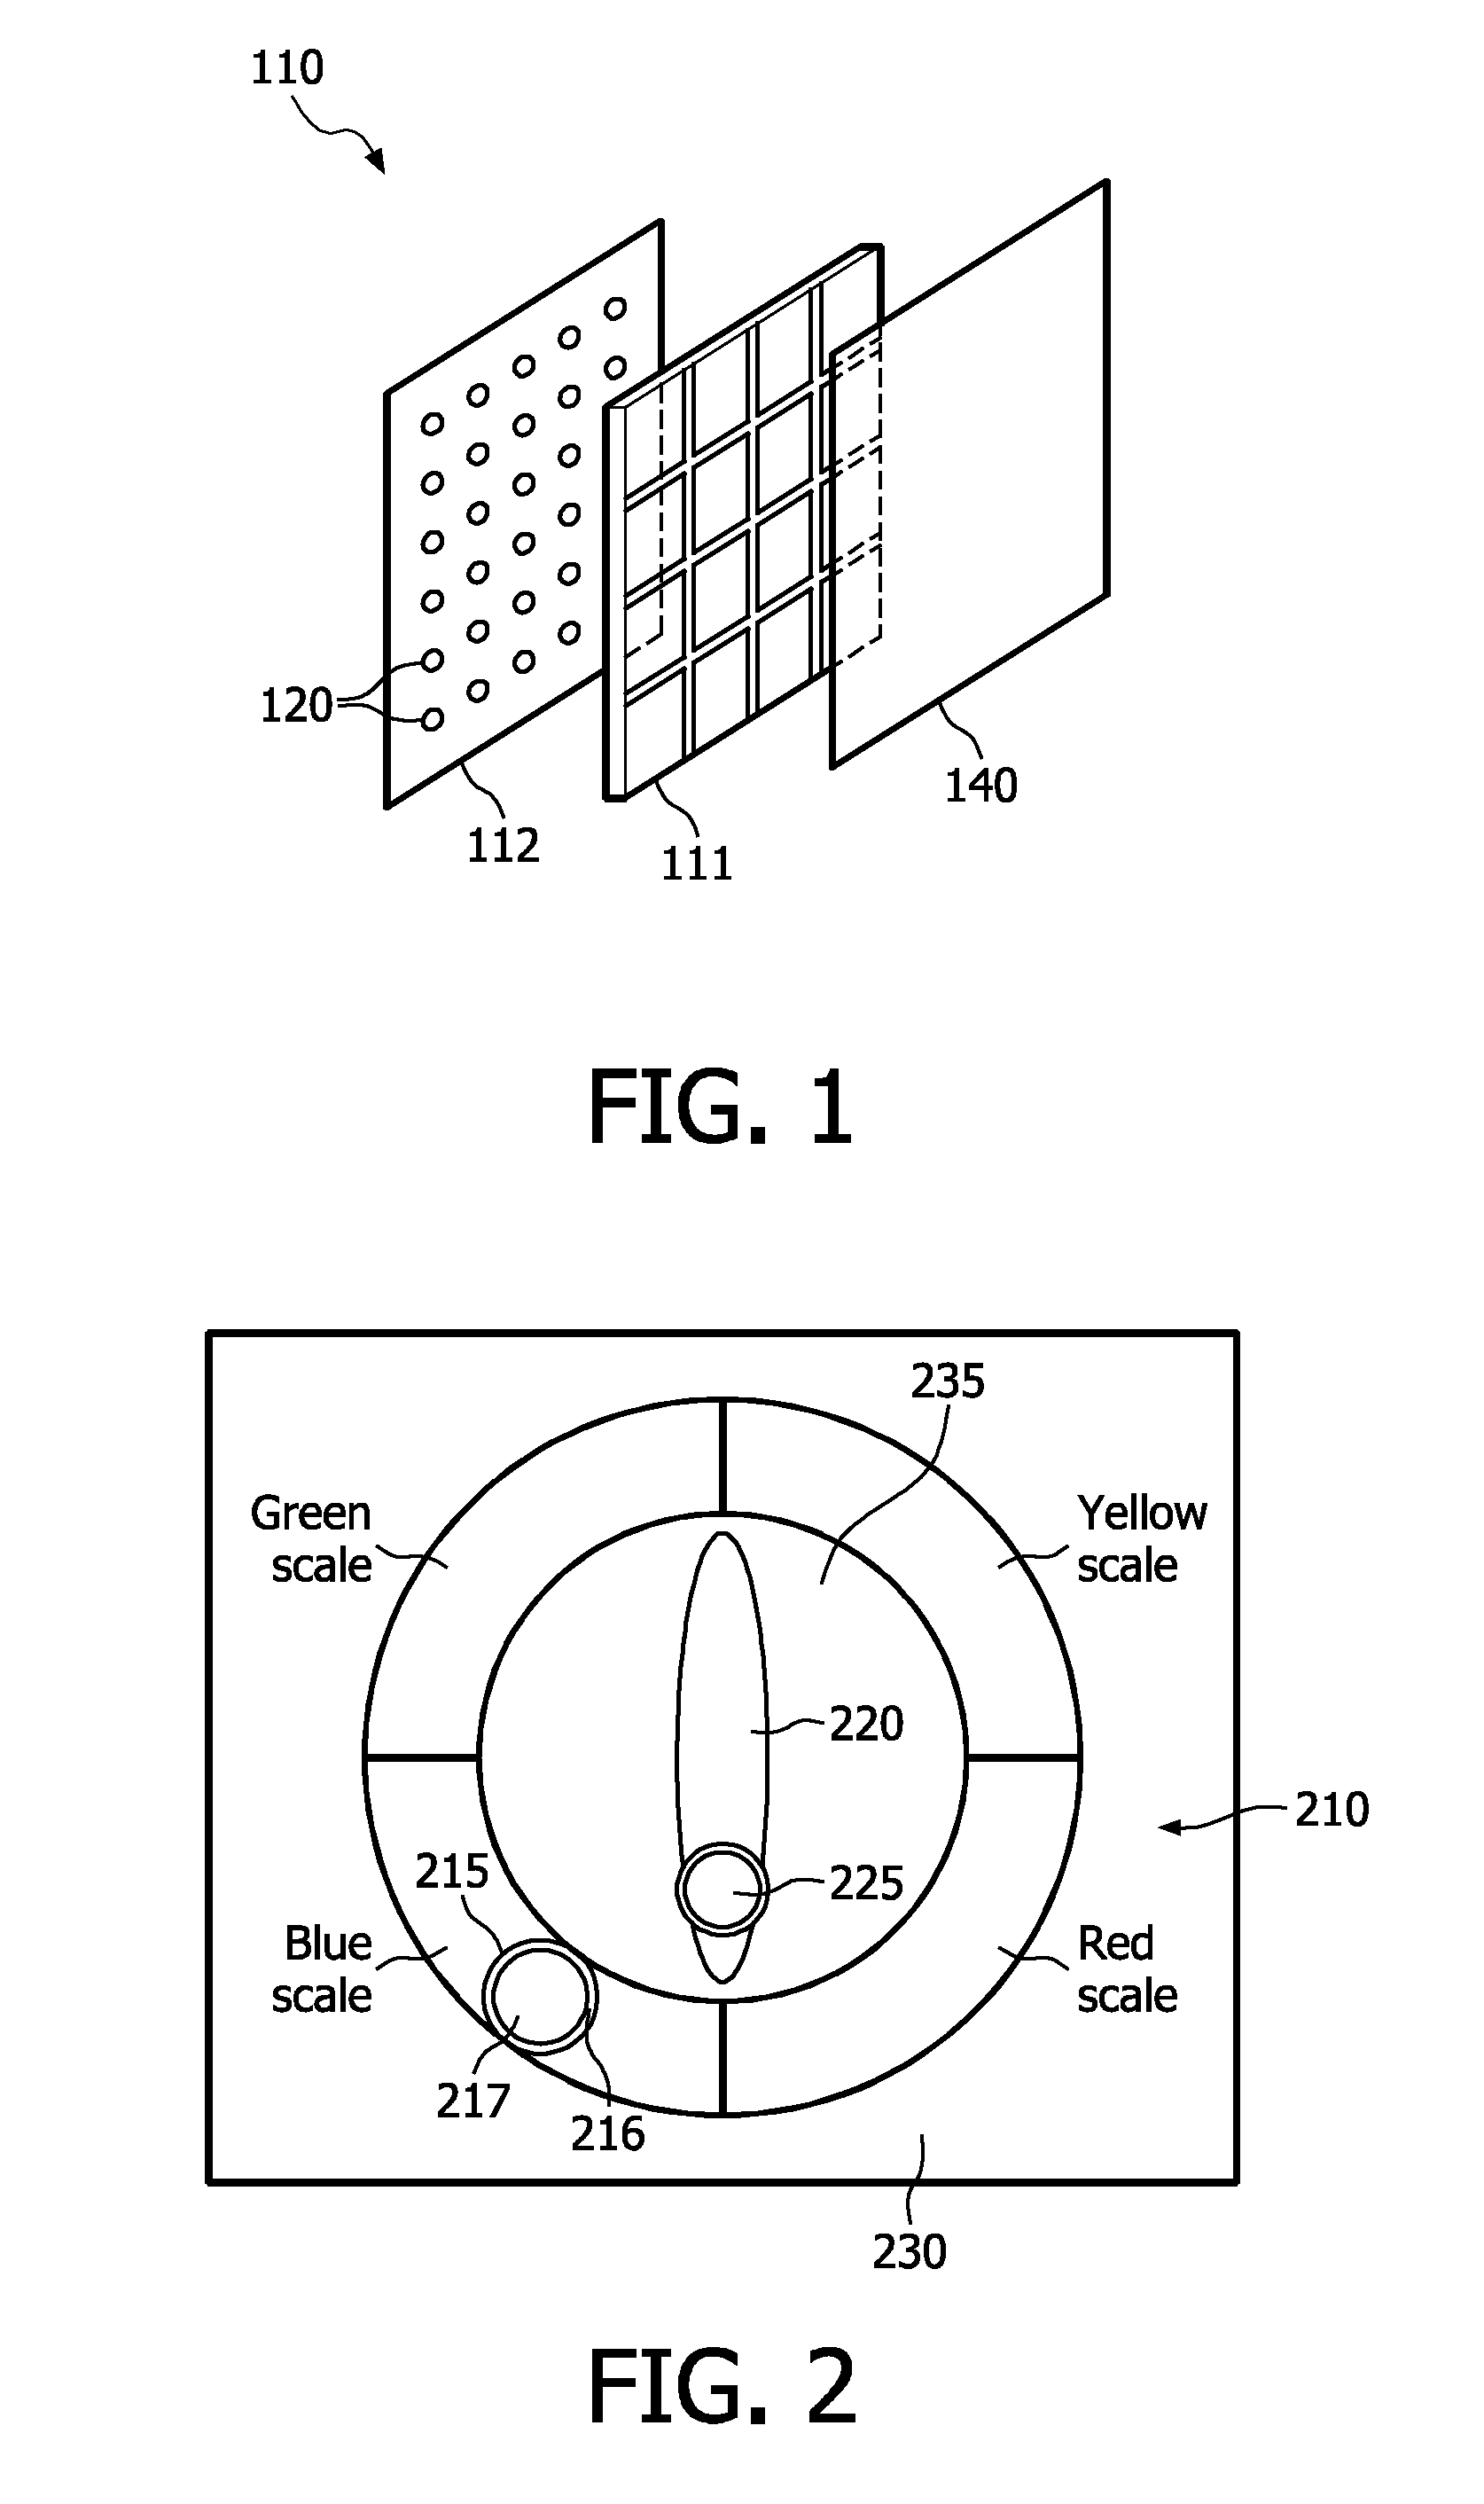 User interface device for controlling a consumer load and light system using such user interface device